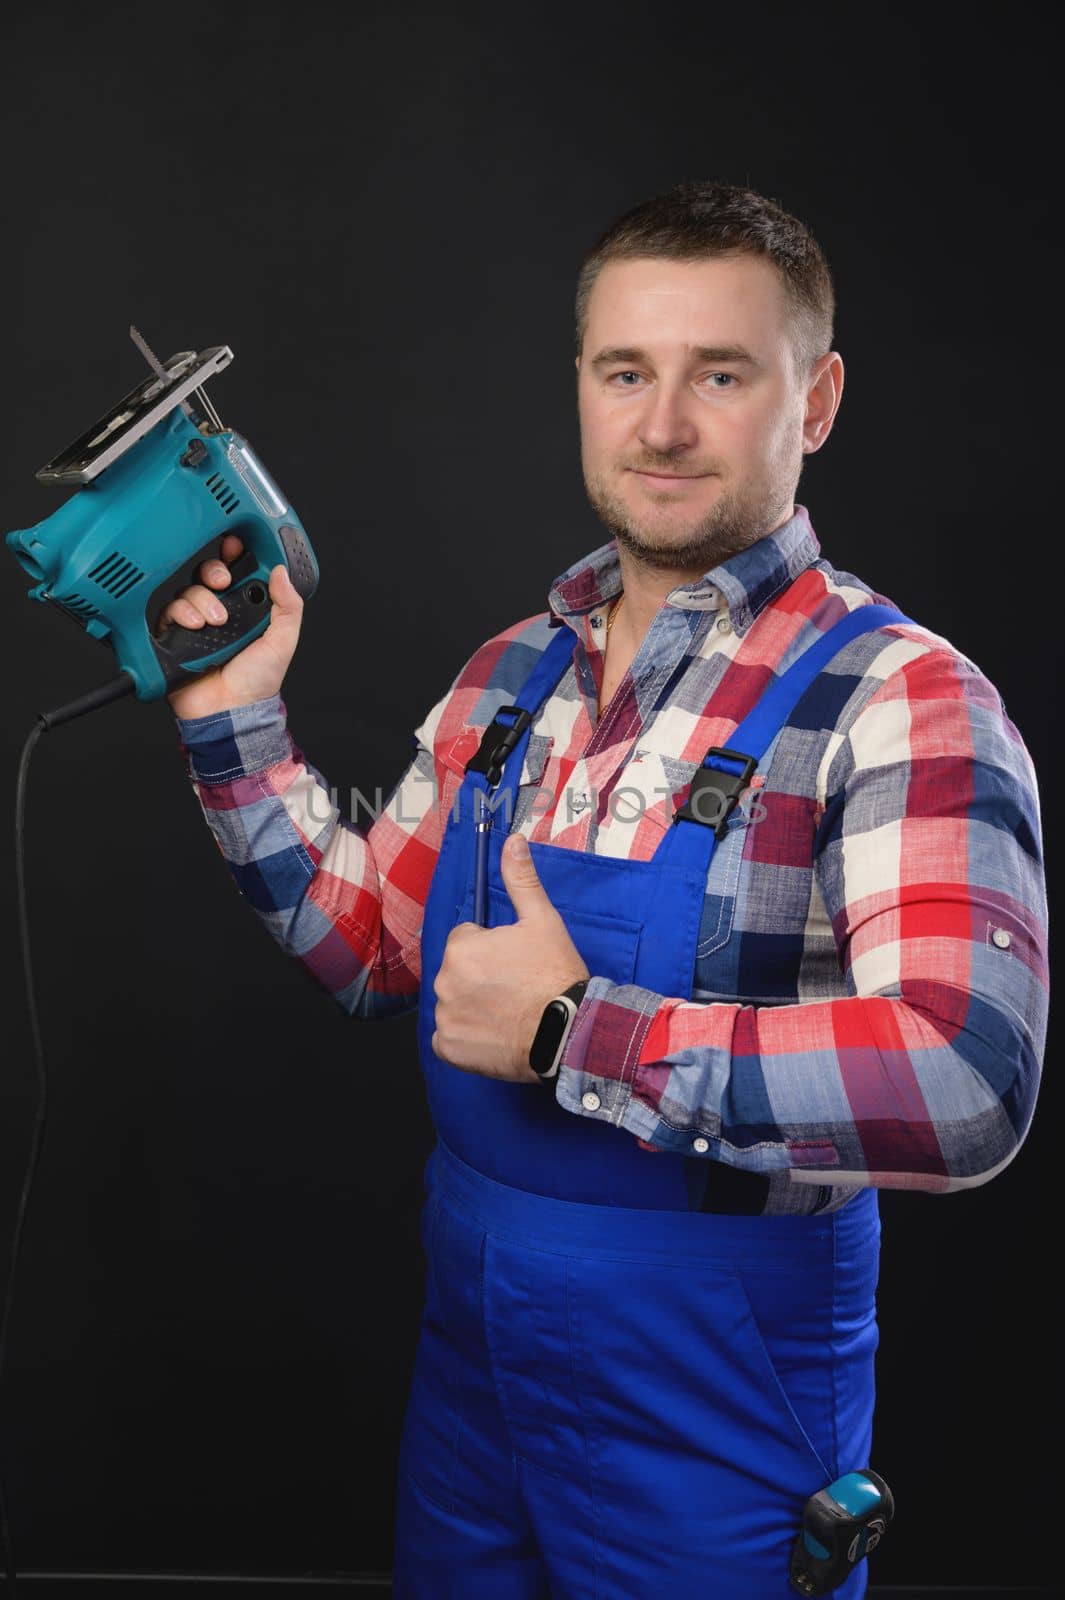 Smiling man in a plaid shirt and overalls holds a jigsaw in his hand. on a black background and with the other hand shows a thumbs up gesture.